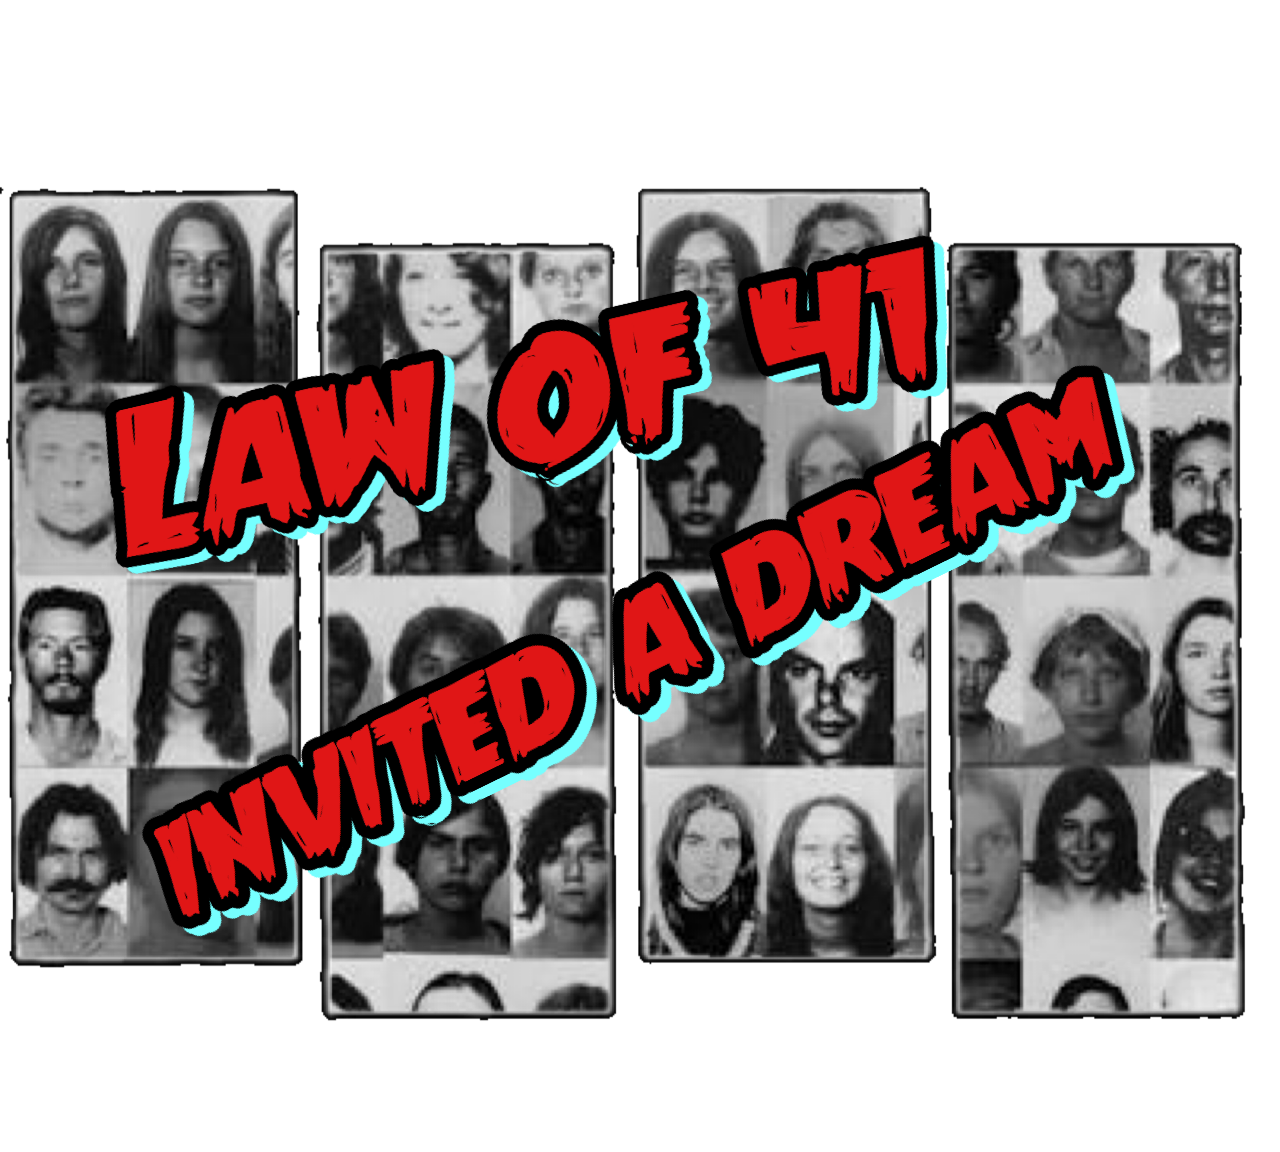 lawof41 invited a dream